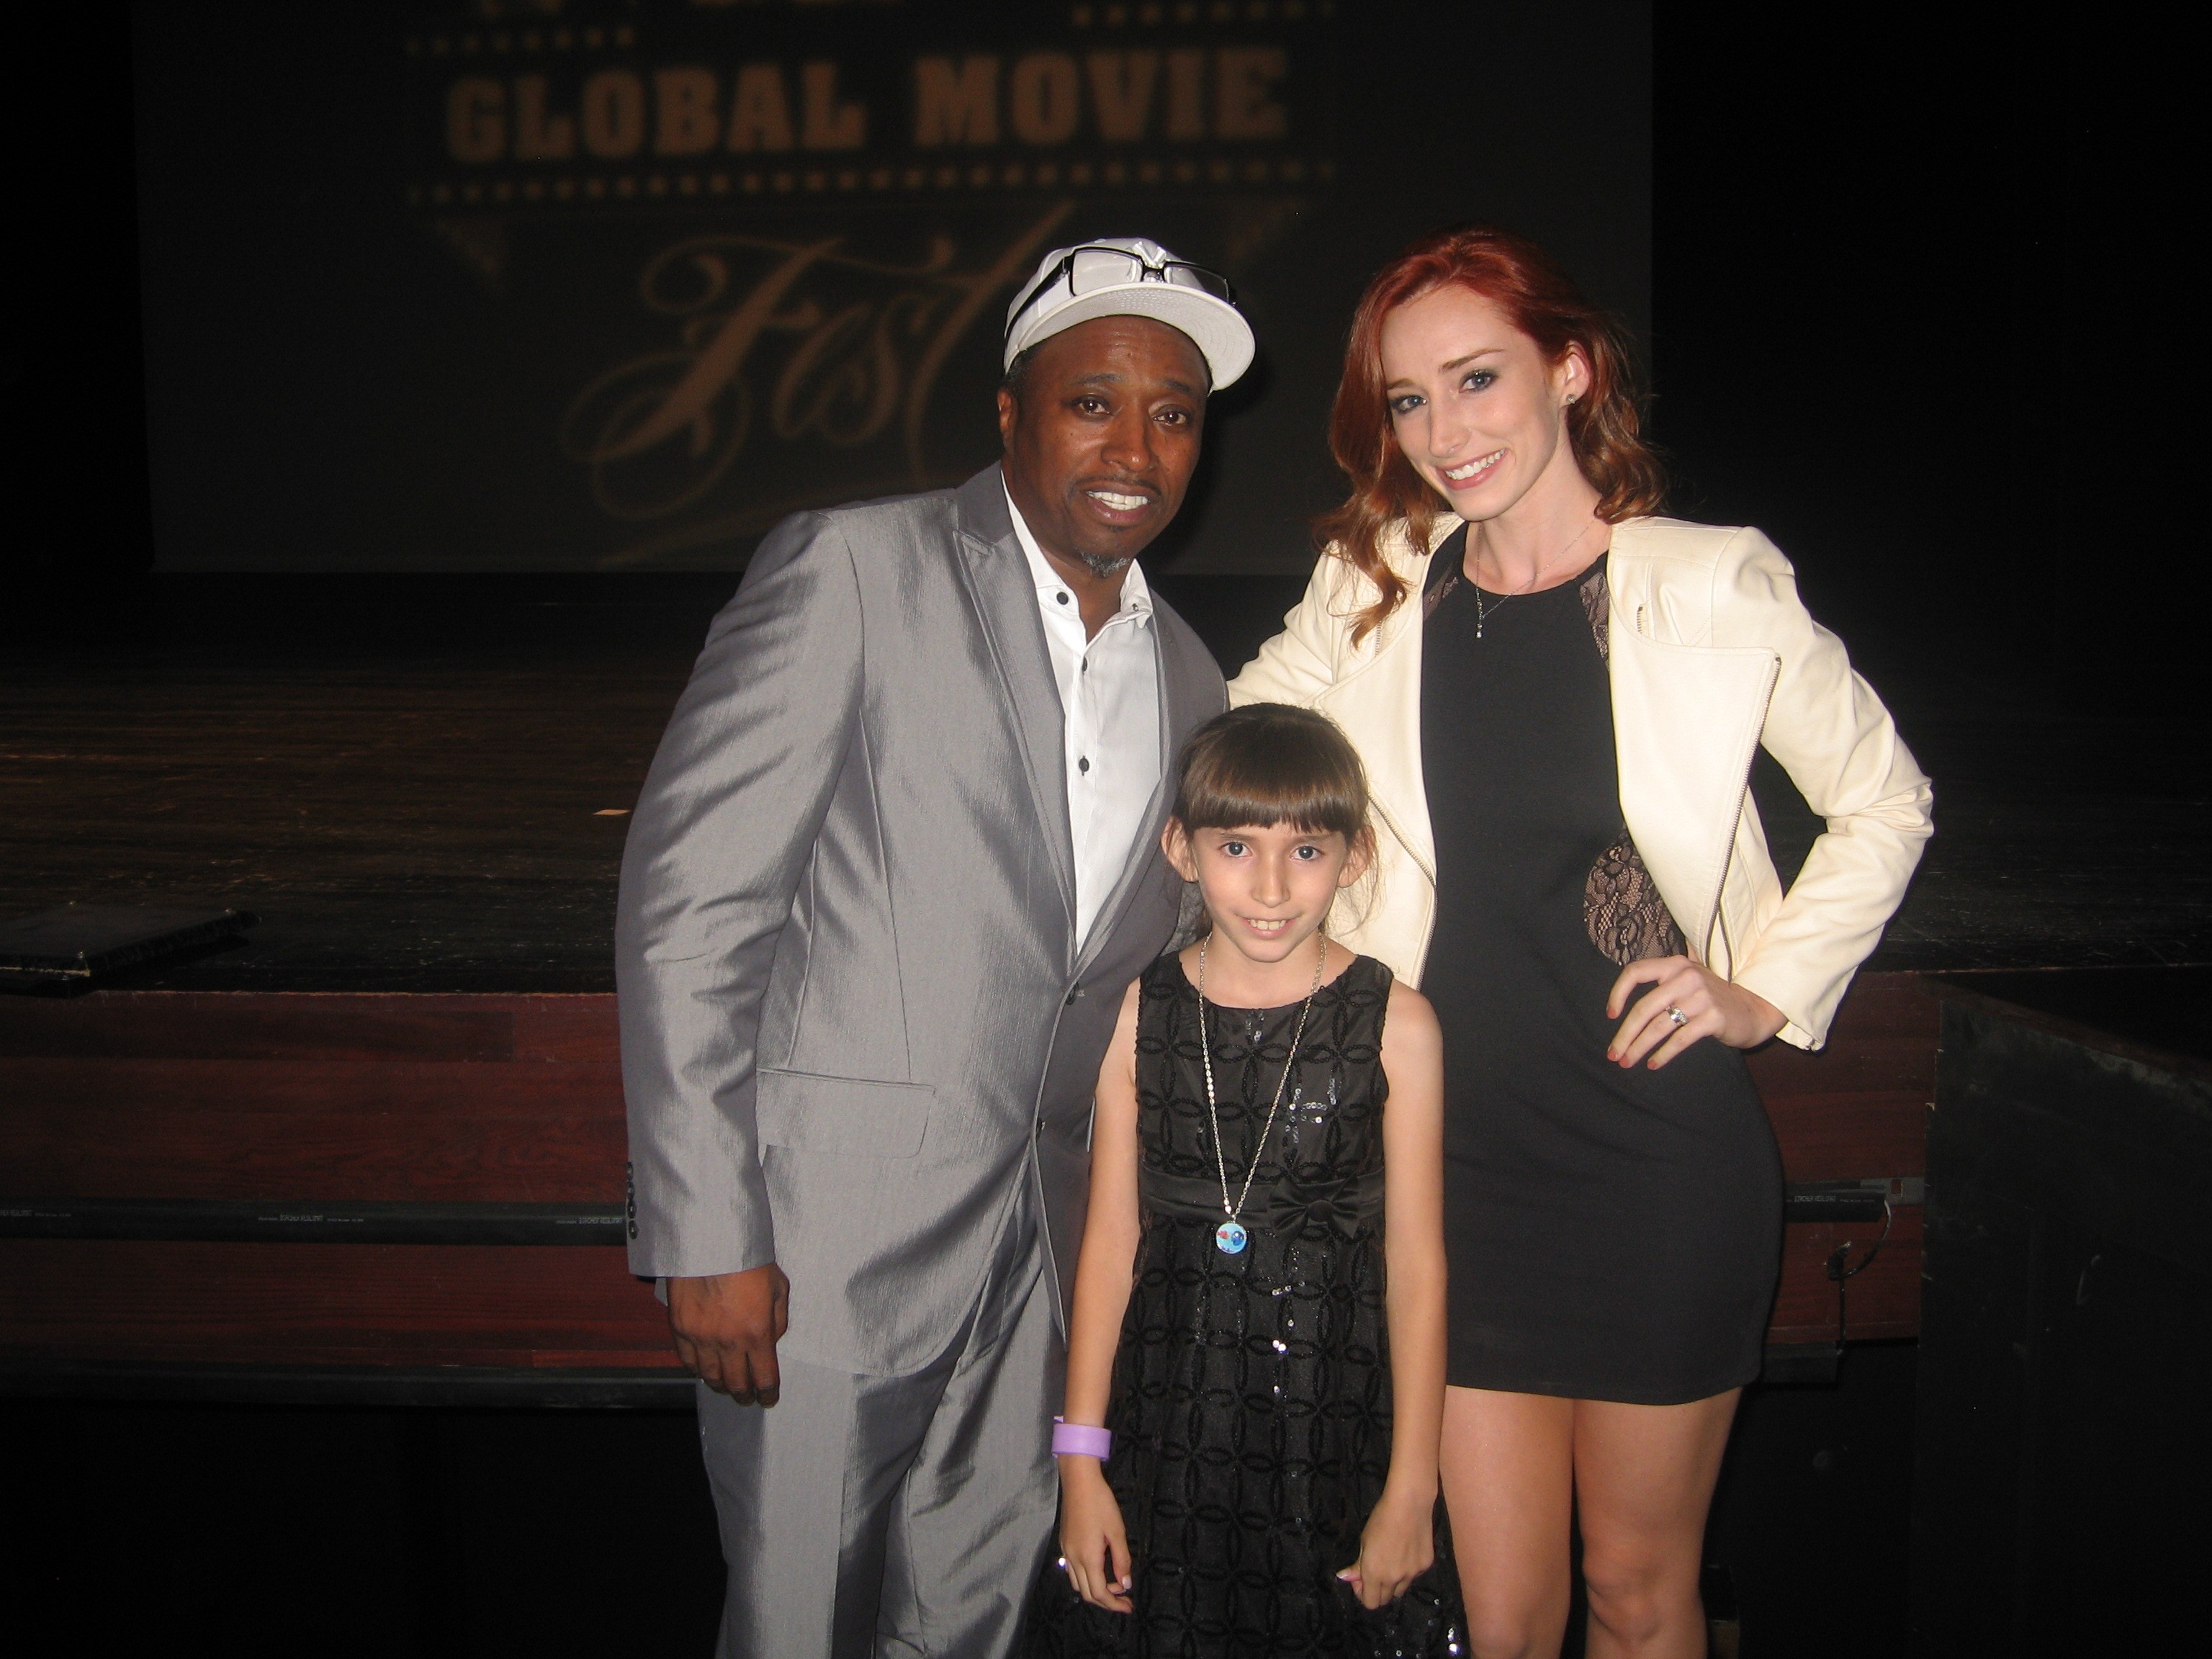 Natalie Miranda with the legendary comedian/actor Eddie Griffin & the very talented Najarra Townsend at the premiere of the feature film 